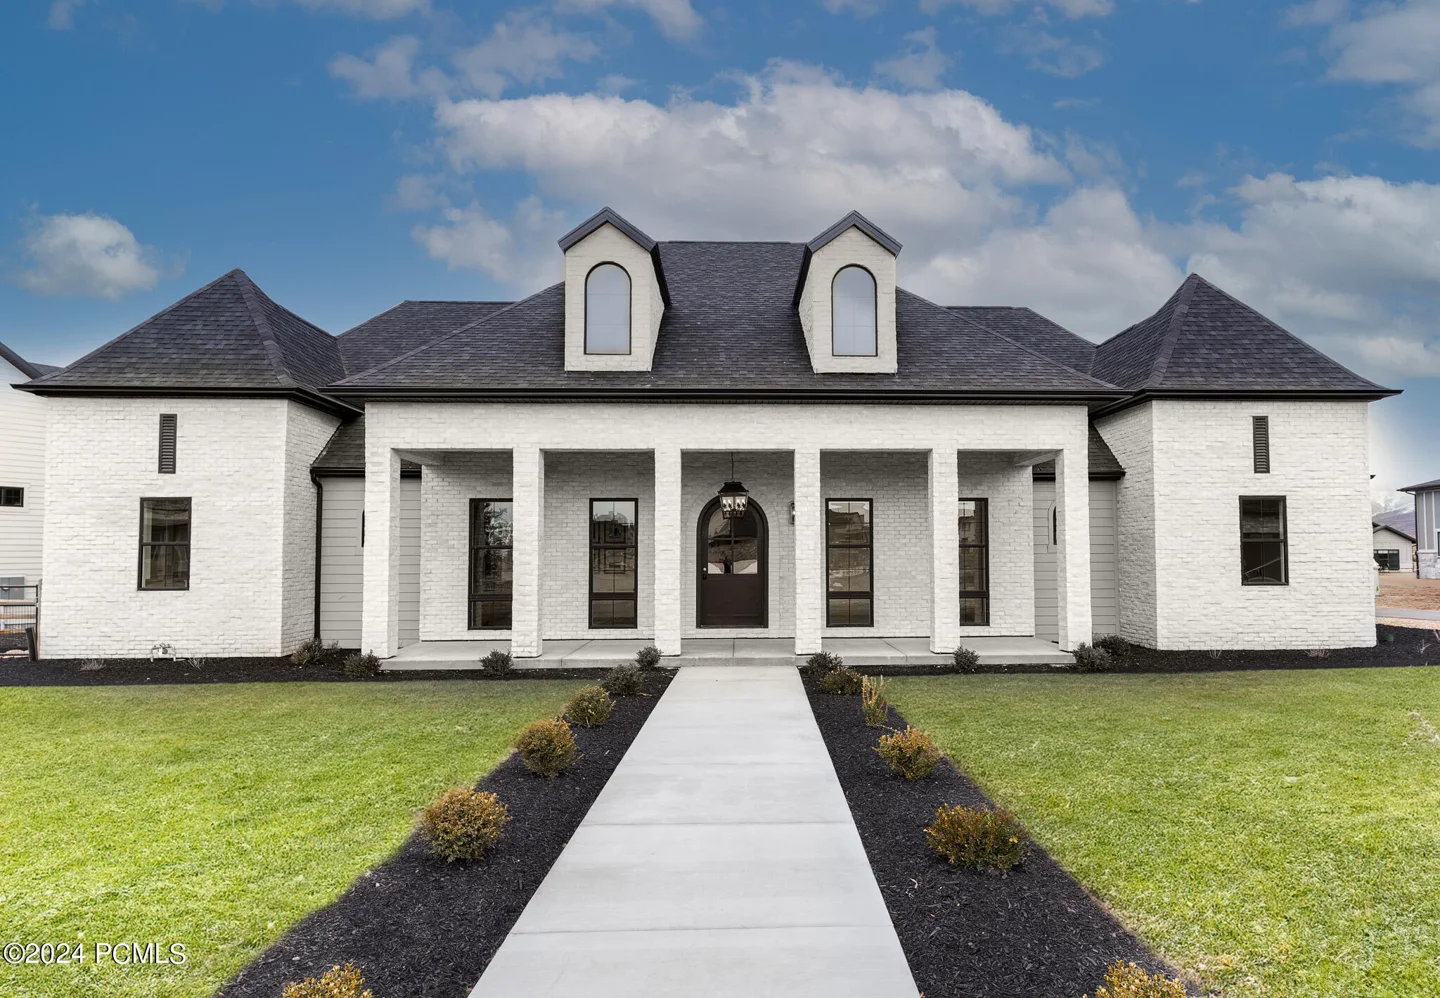 This timeless home offers luxurious main level living